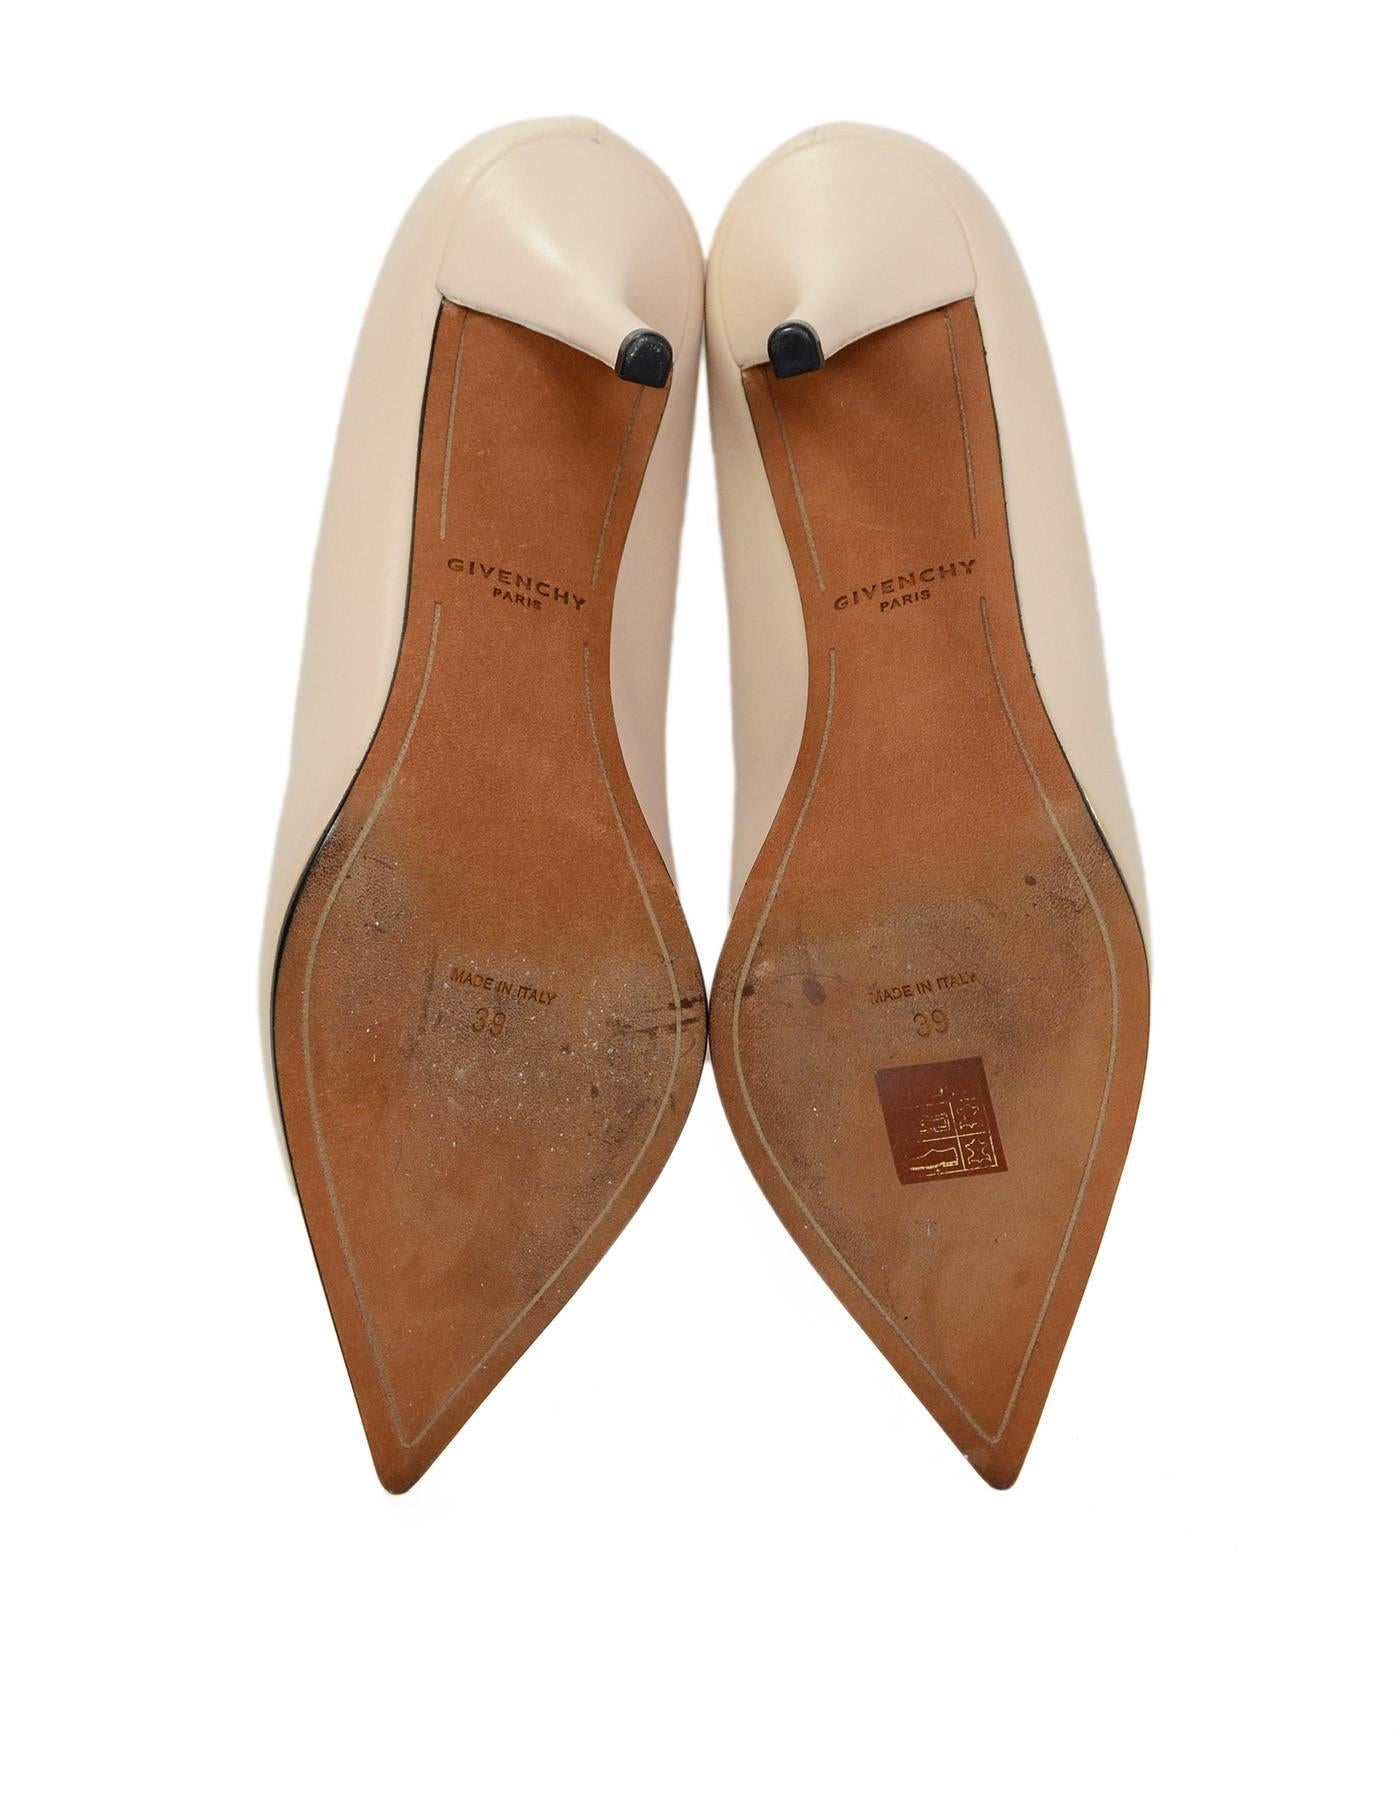 Givenchy Nude Leather Pointed Toe Pumps sz 39 rt. $650 1